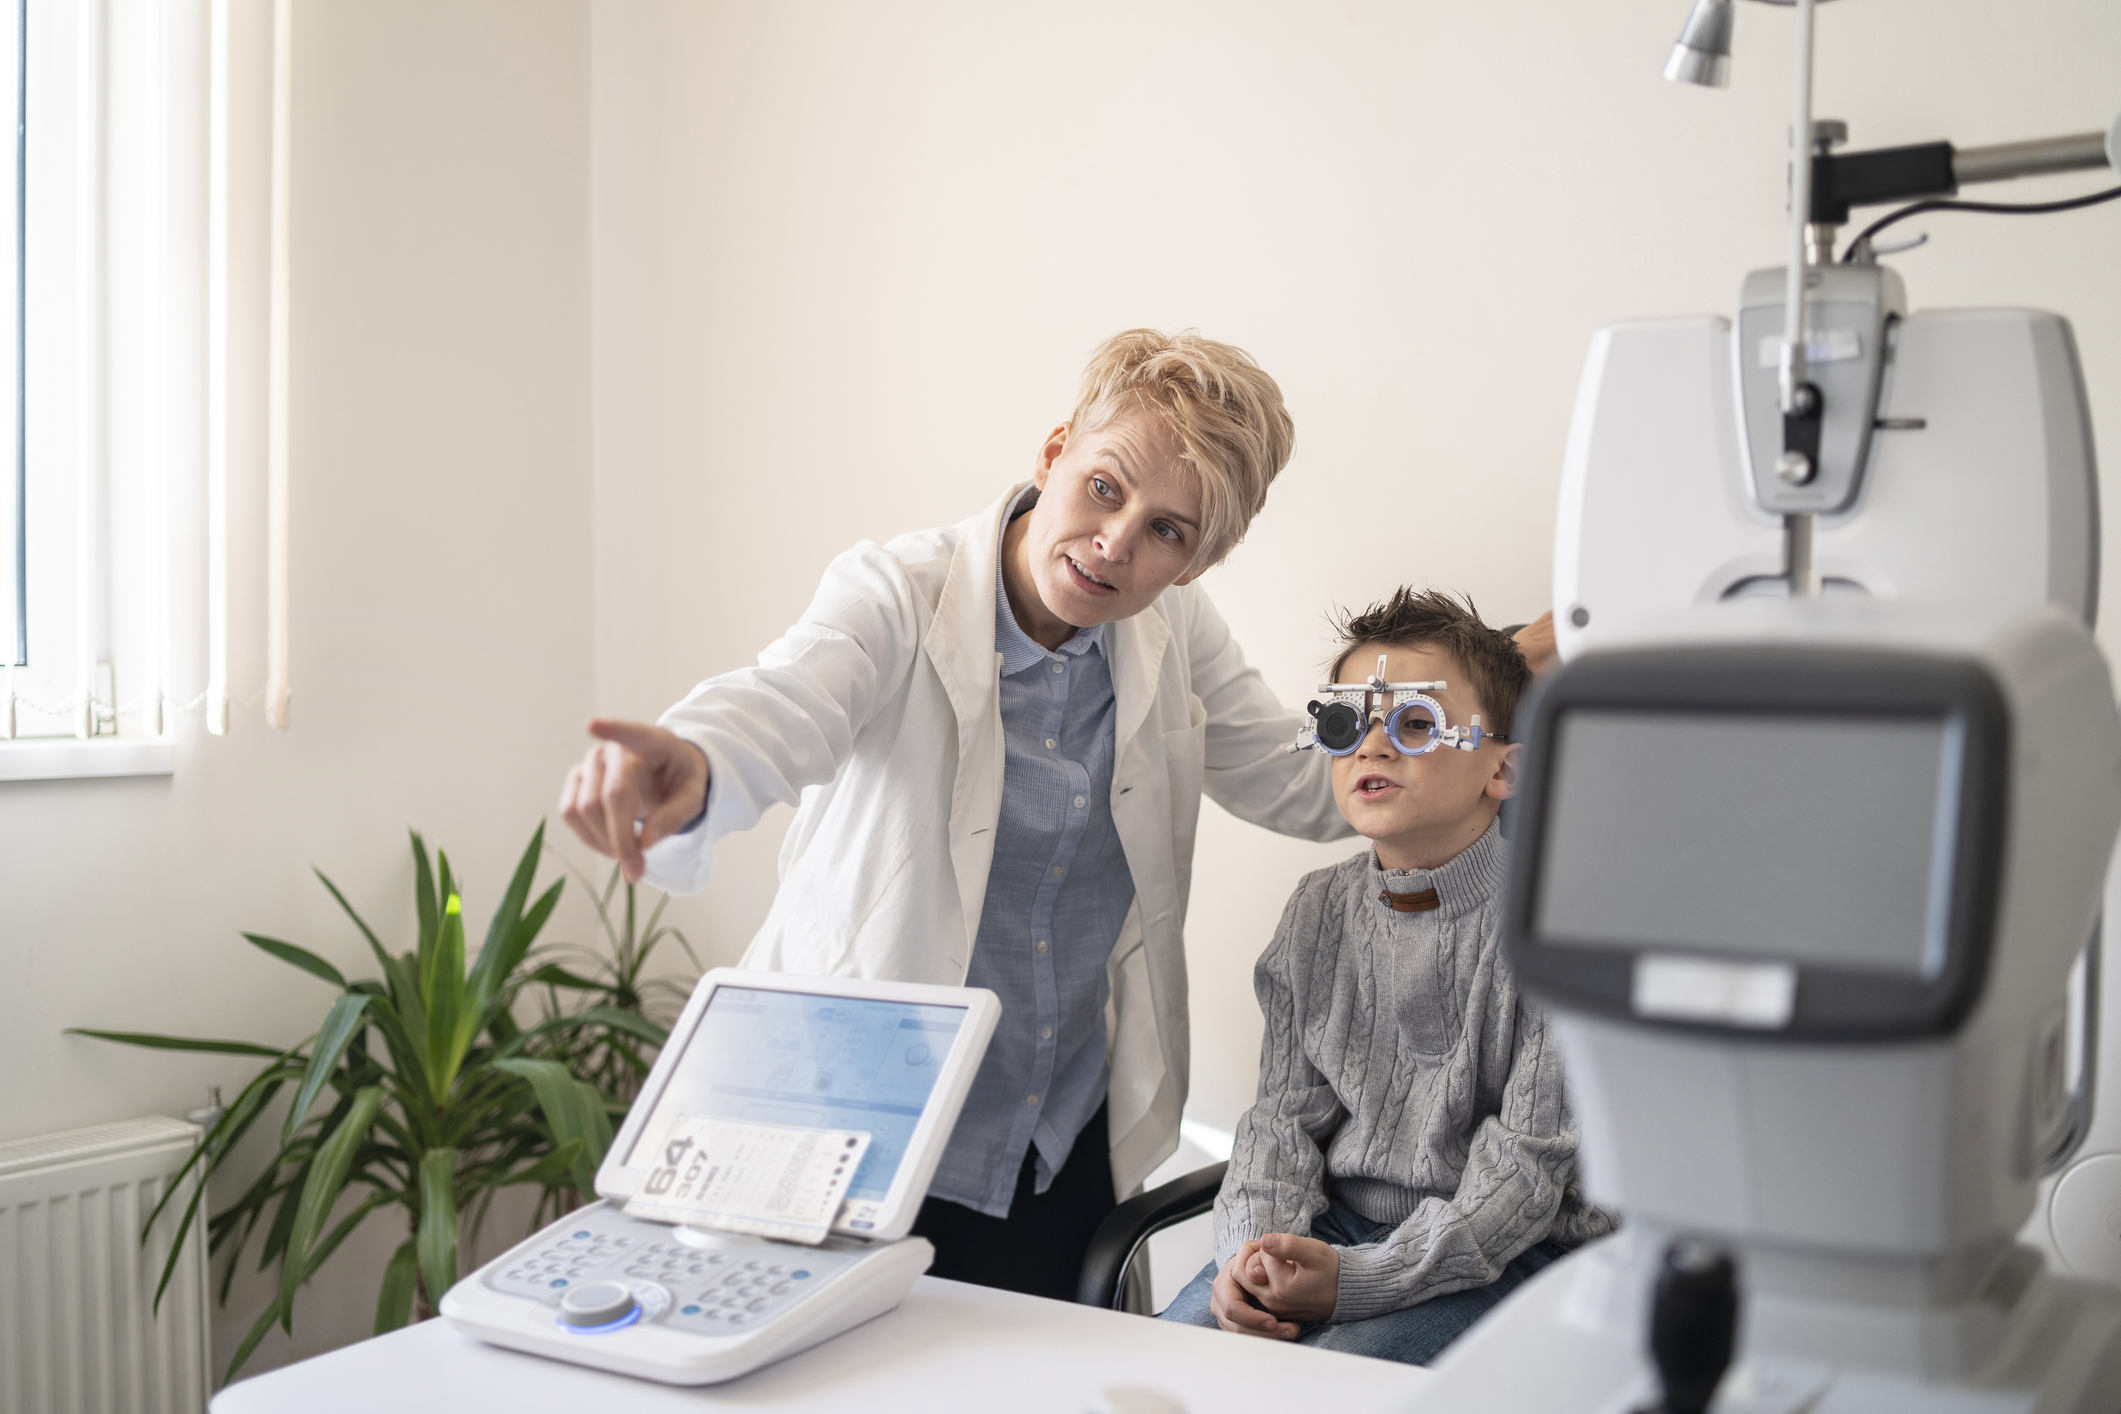 Female optometrist points to the Snellen Chart, while a young boy reads out the letters